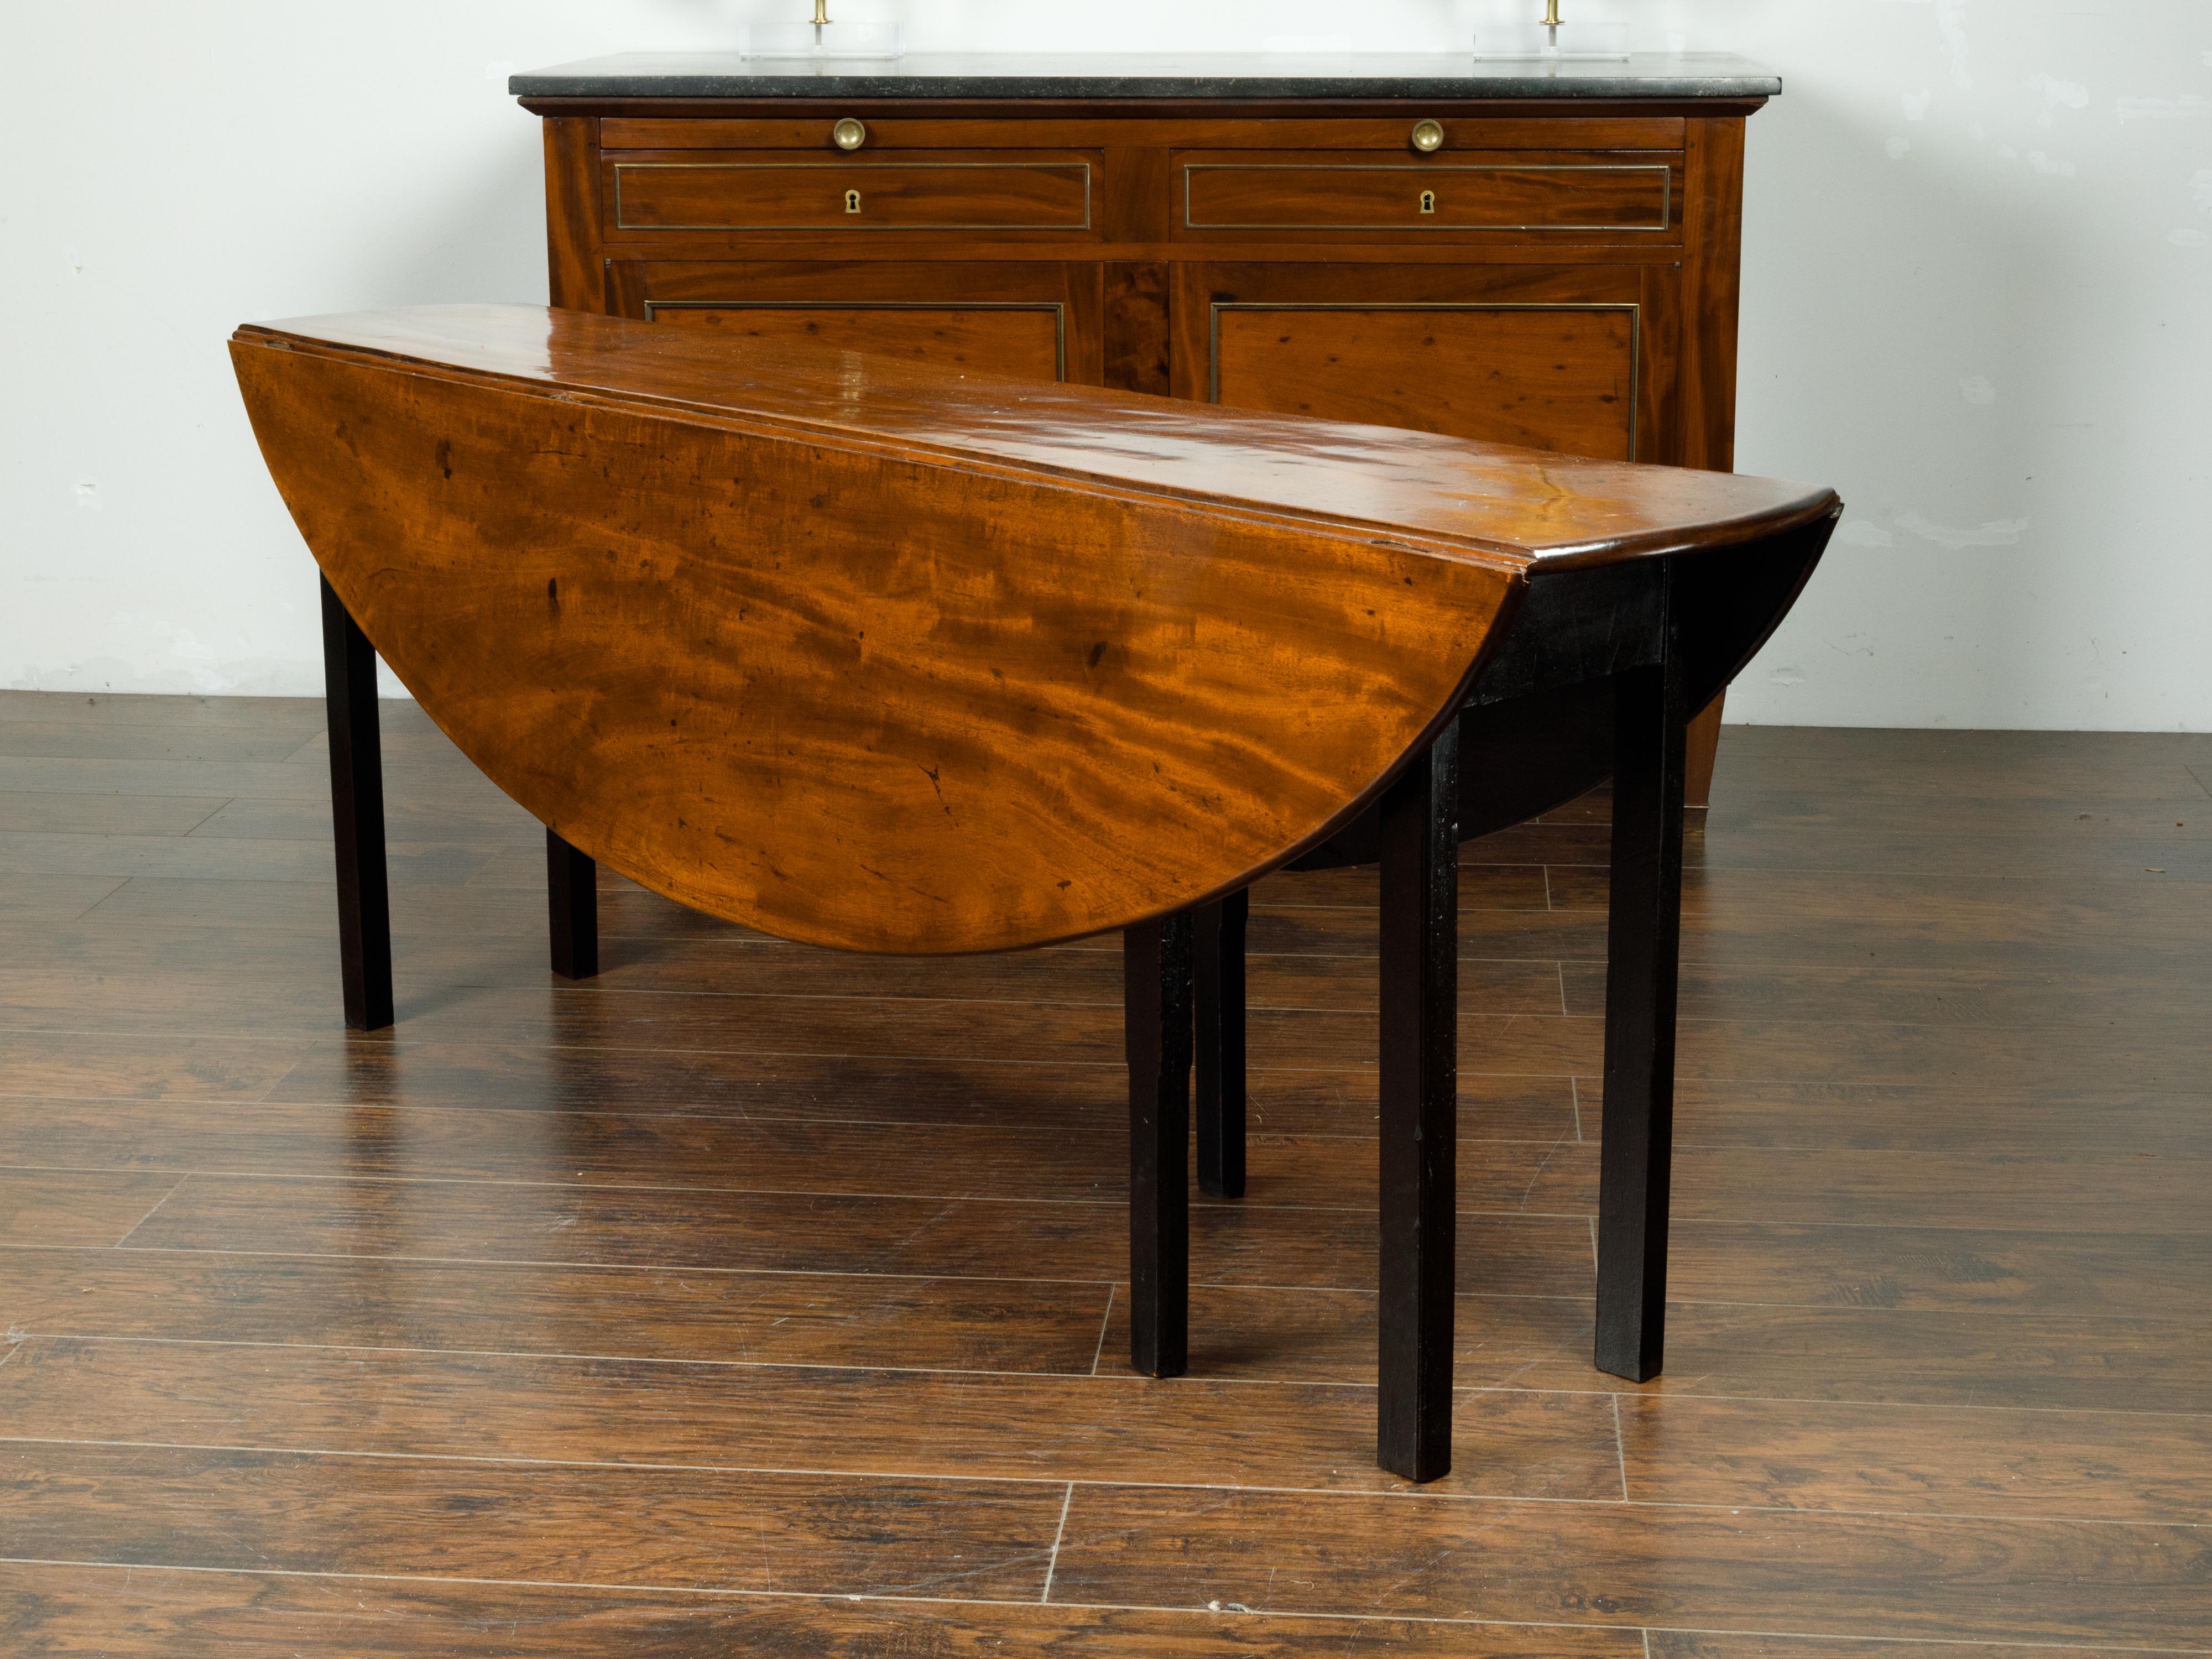 English 1820s Mahogany Drop Leaf Dining Table with Oval Top and Ebonized Legs 5